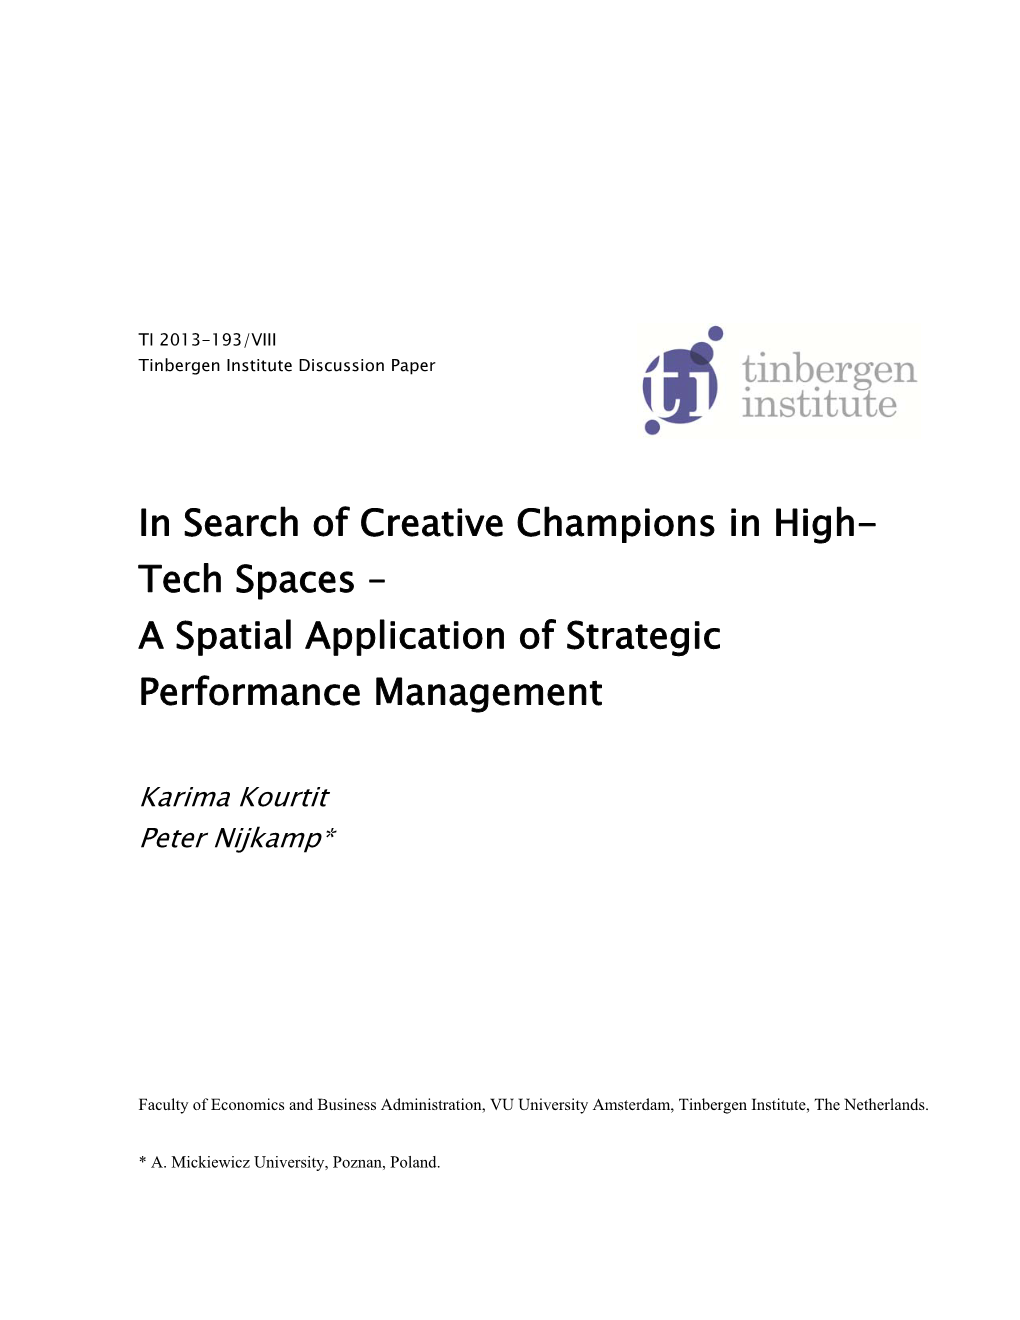 In Search of Creative Champions in High- Tech Spaces – a Spatial Application of Strategic Performance Management